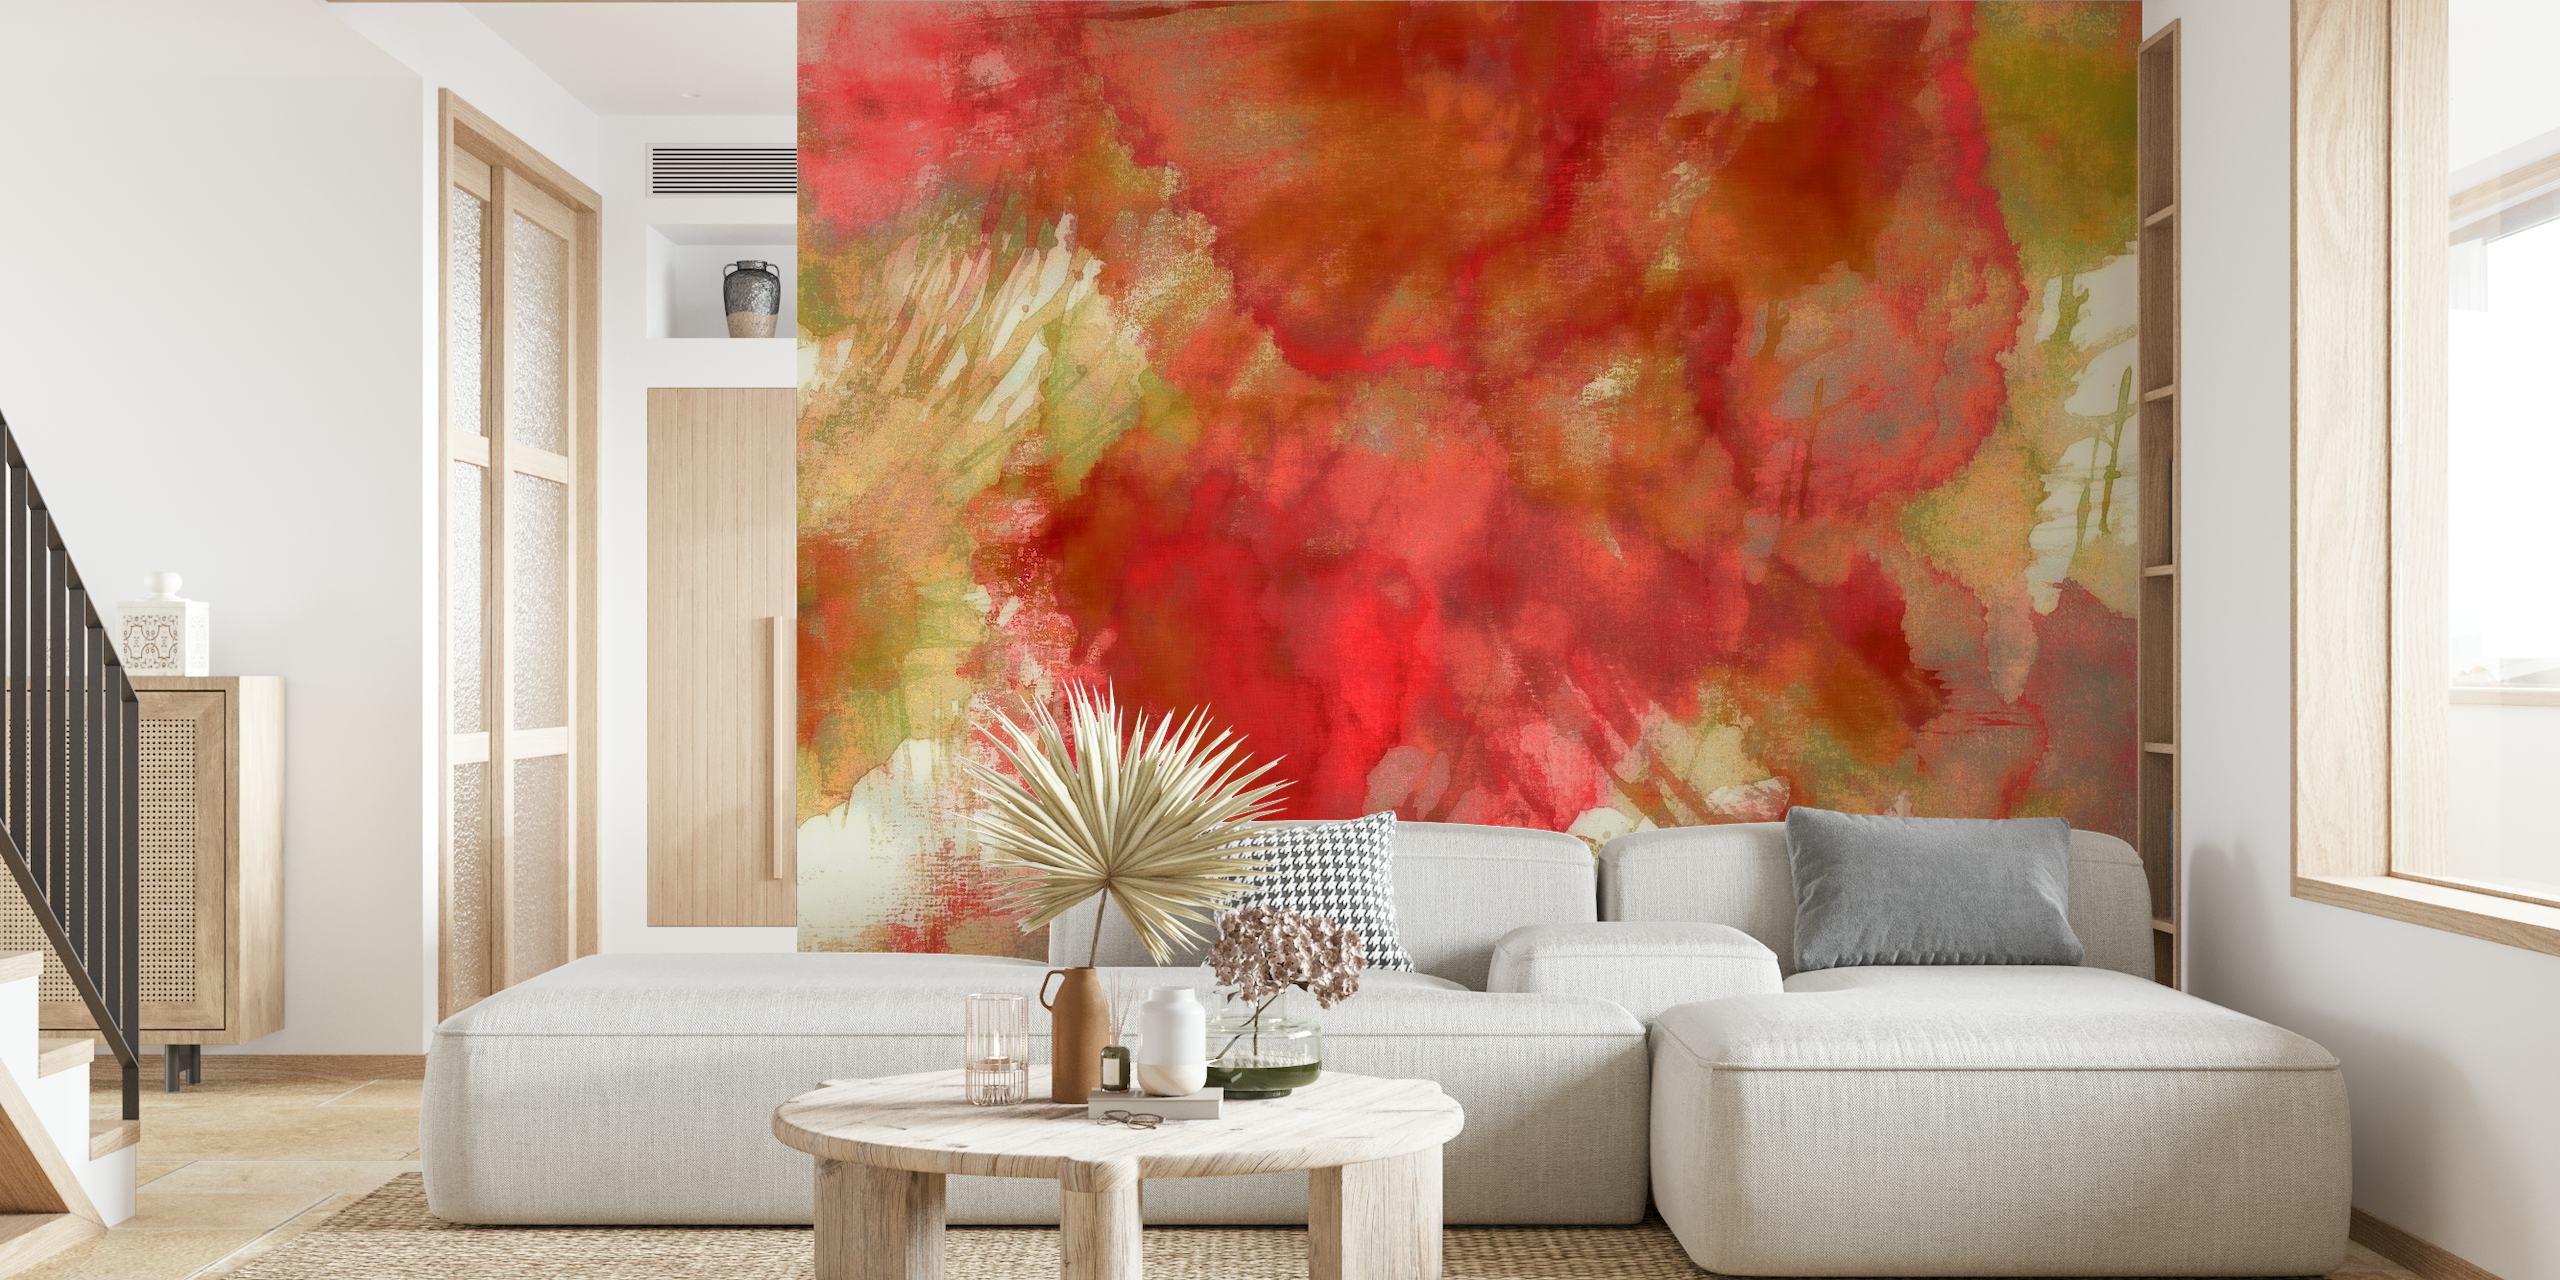 Abstract coral garden wall mural with warm red and cream tones replicating the underwater beauty of a coral reef.